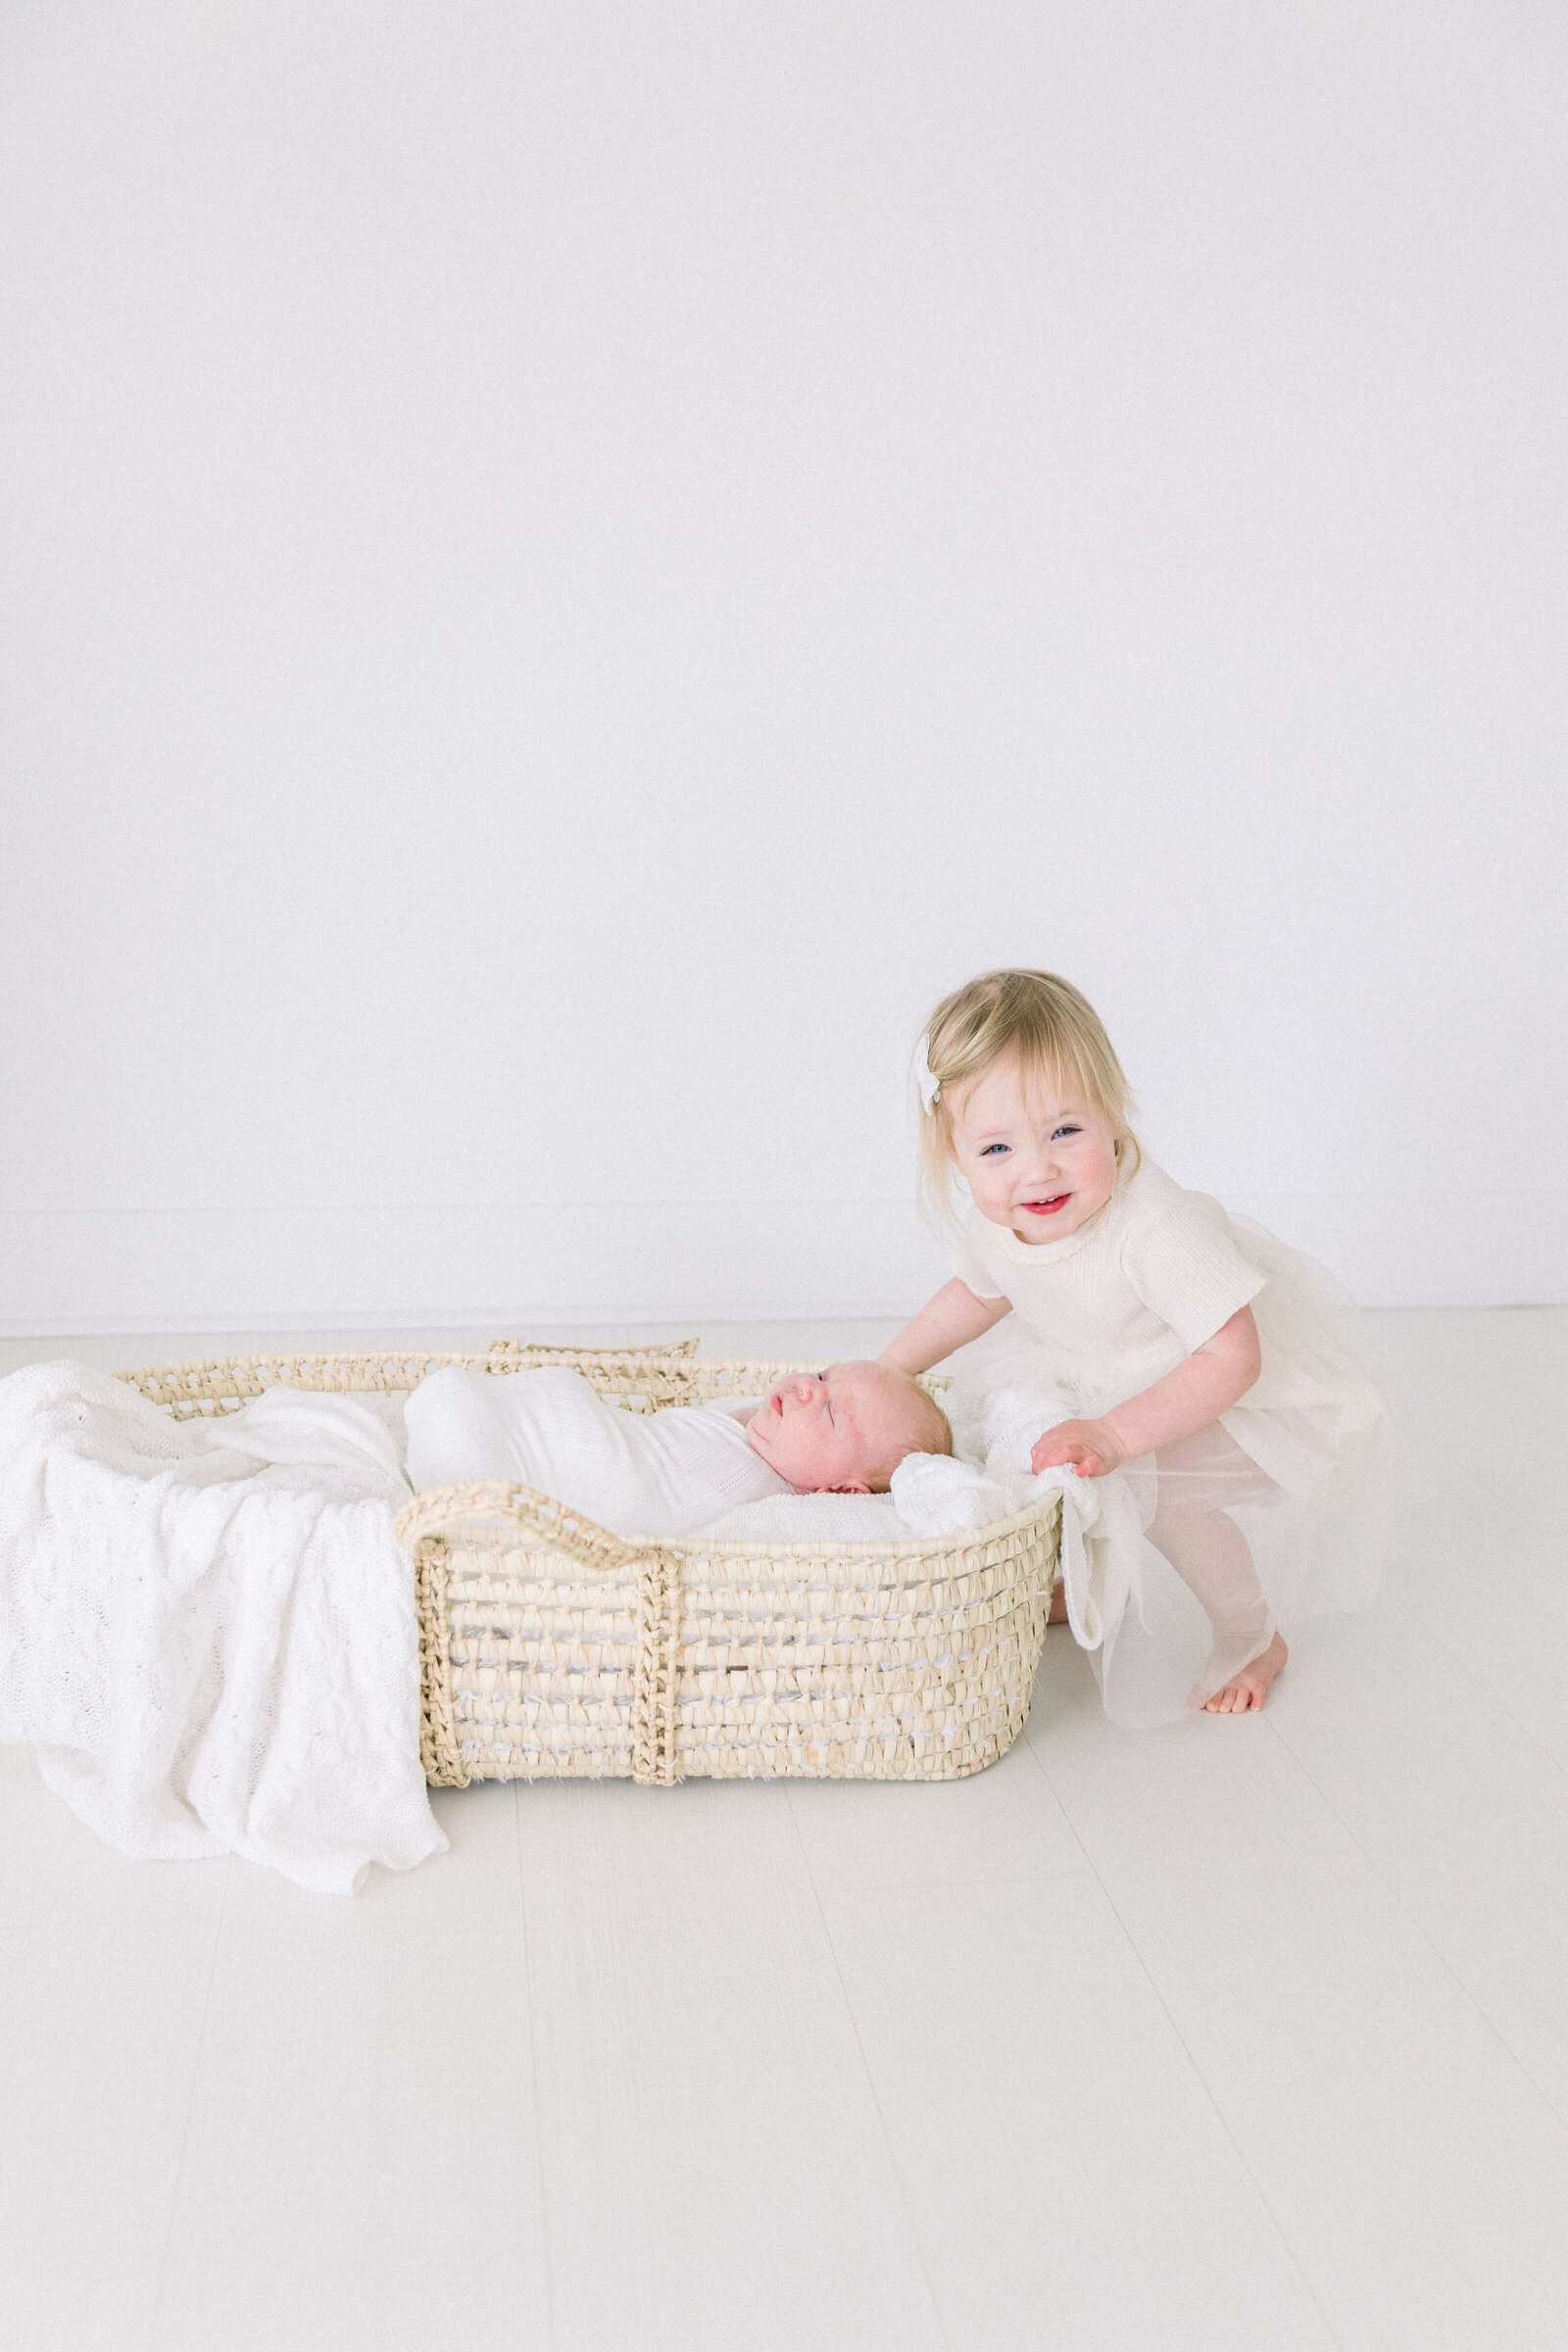 Image of newborn baby in basket with big sister in white dress looking over him taken by Newborn Photographer Sacramento Kelsey Krall Photography